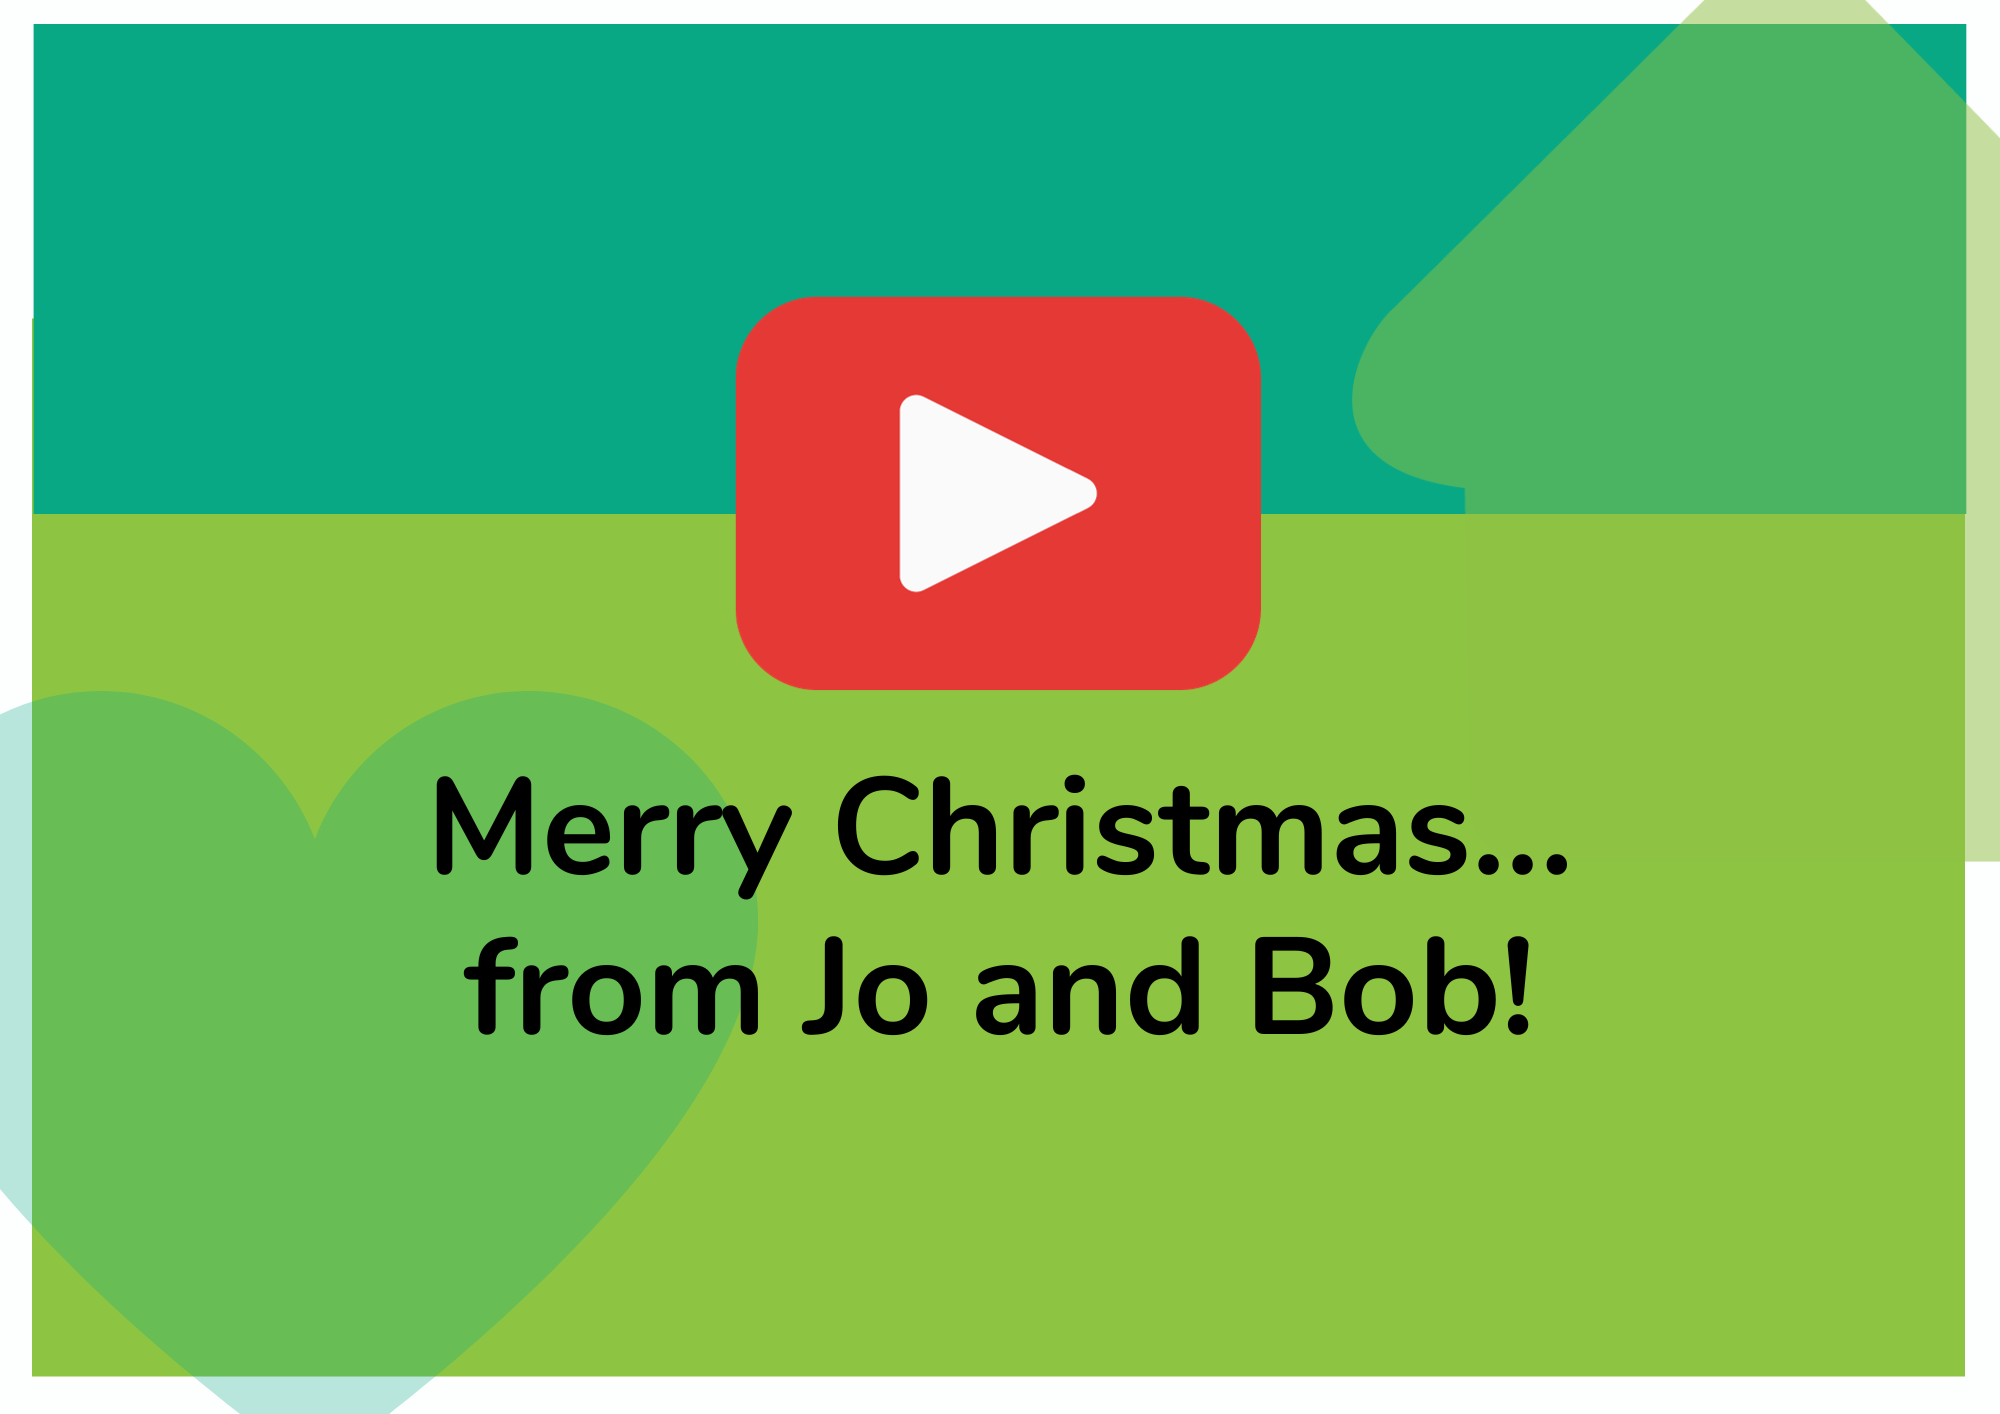 Merry Christmas from Jo and Bob